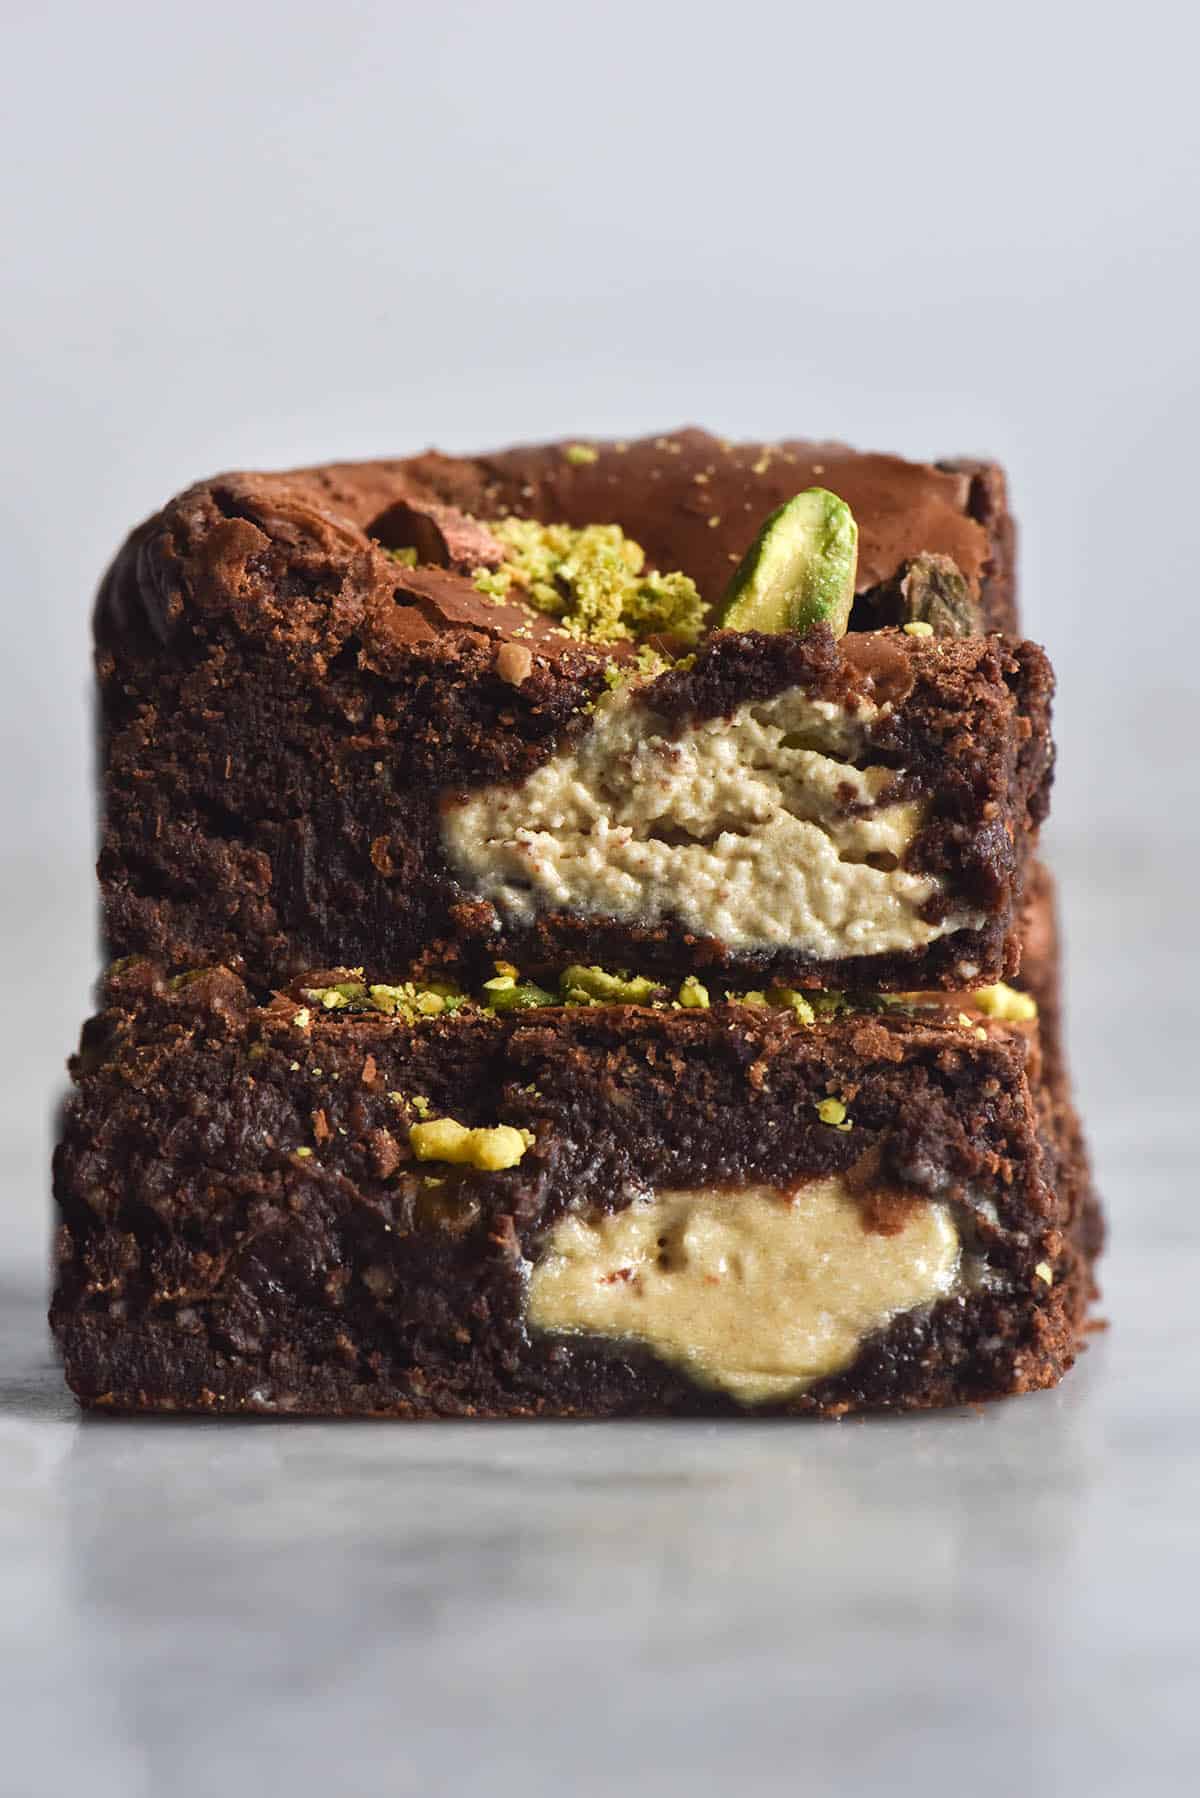 A side on view of a stack of two gluten free brownie squares that are filled with halva and pistachios. Large chunks of halva are visible in the brownie sides, as are chunks of browned and fresh, bright green pistachios. The brownies sit atop a white marble table against a white backdrop